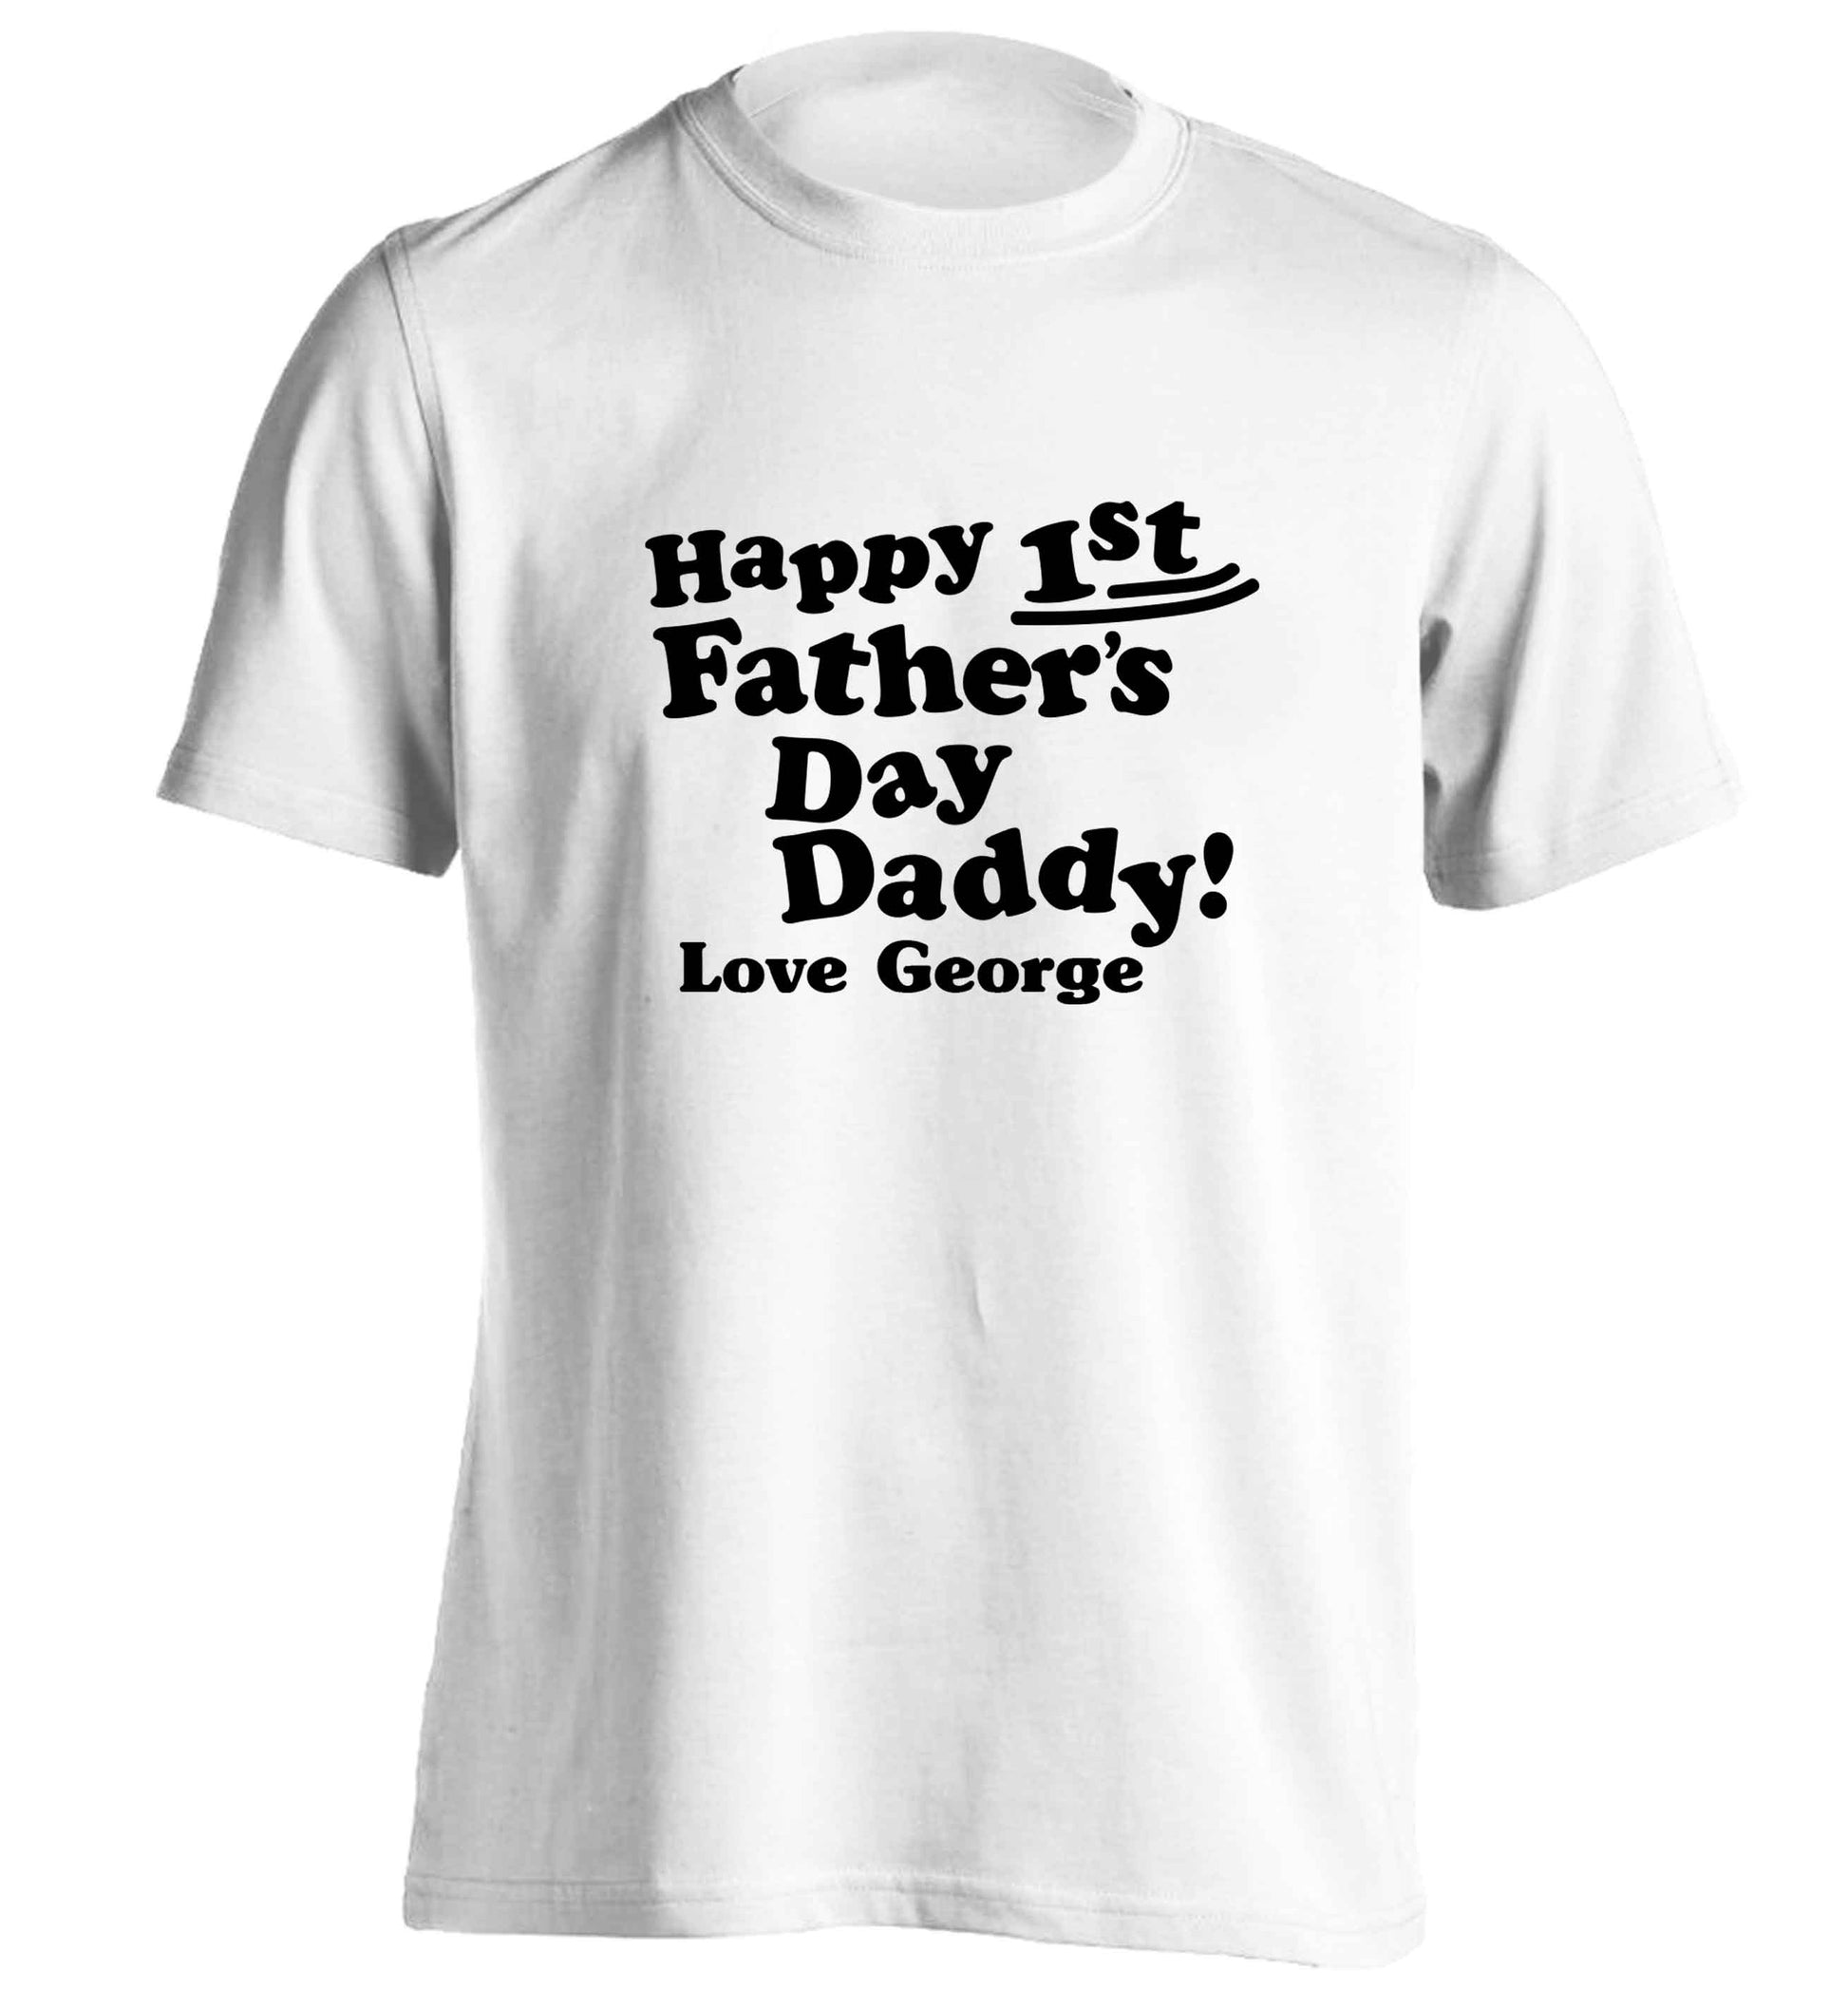 Happy first Fathers Day daddy love personalised adults unisex white Tshirt 2XL